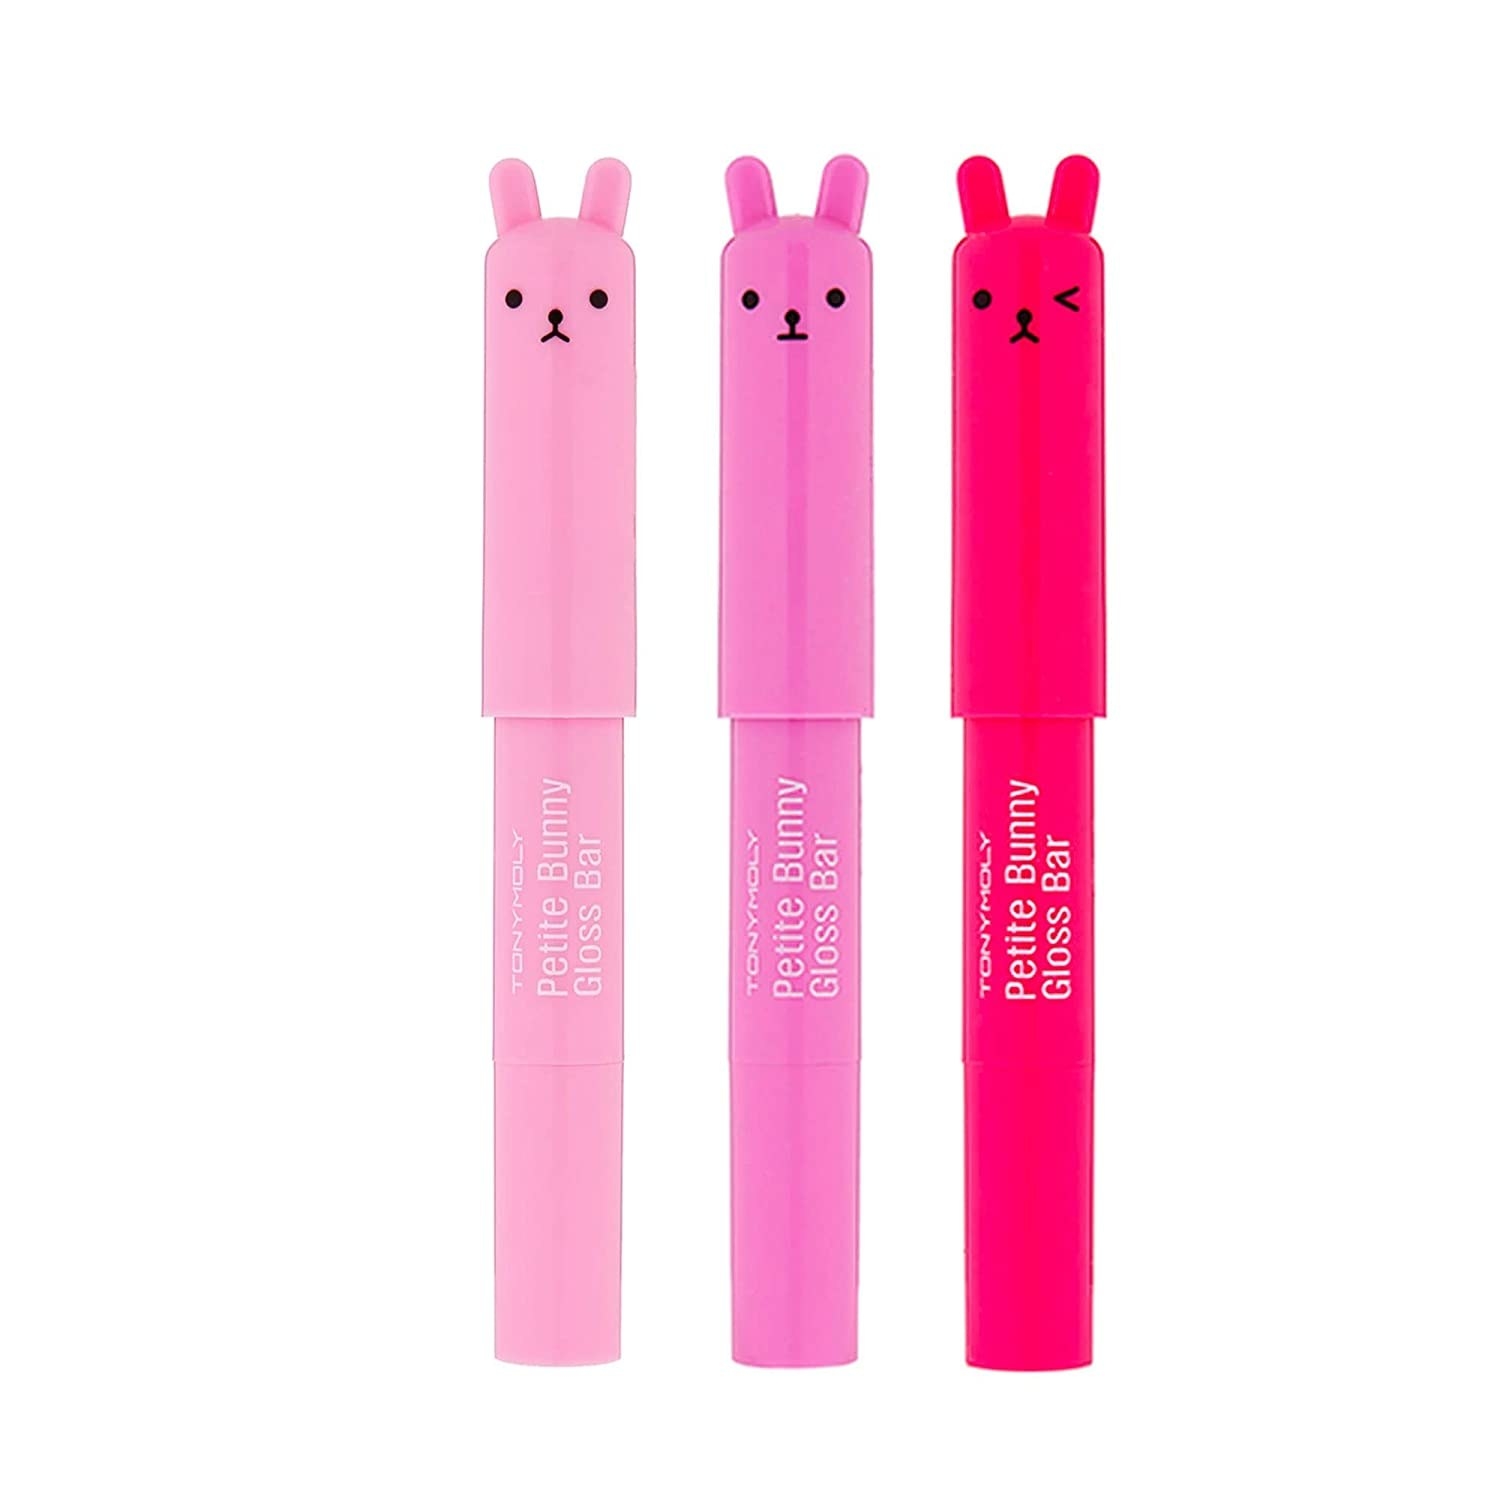 The three slip gloss sticks with bunny shaped caps in light, medium, and bright pink